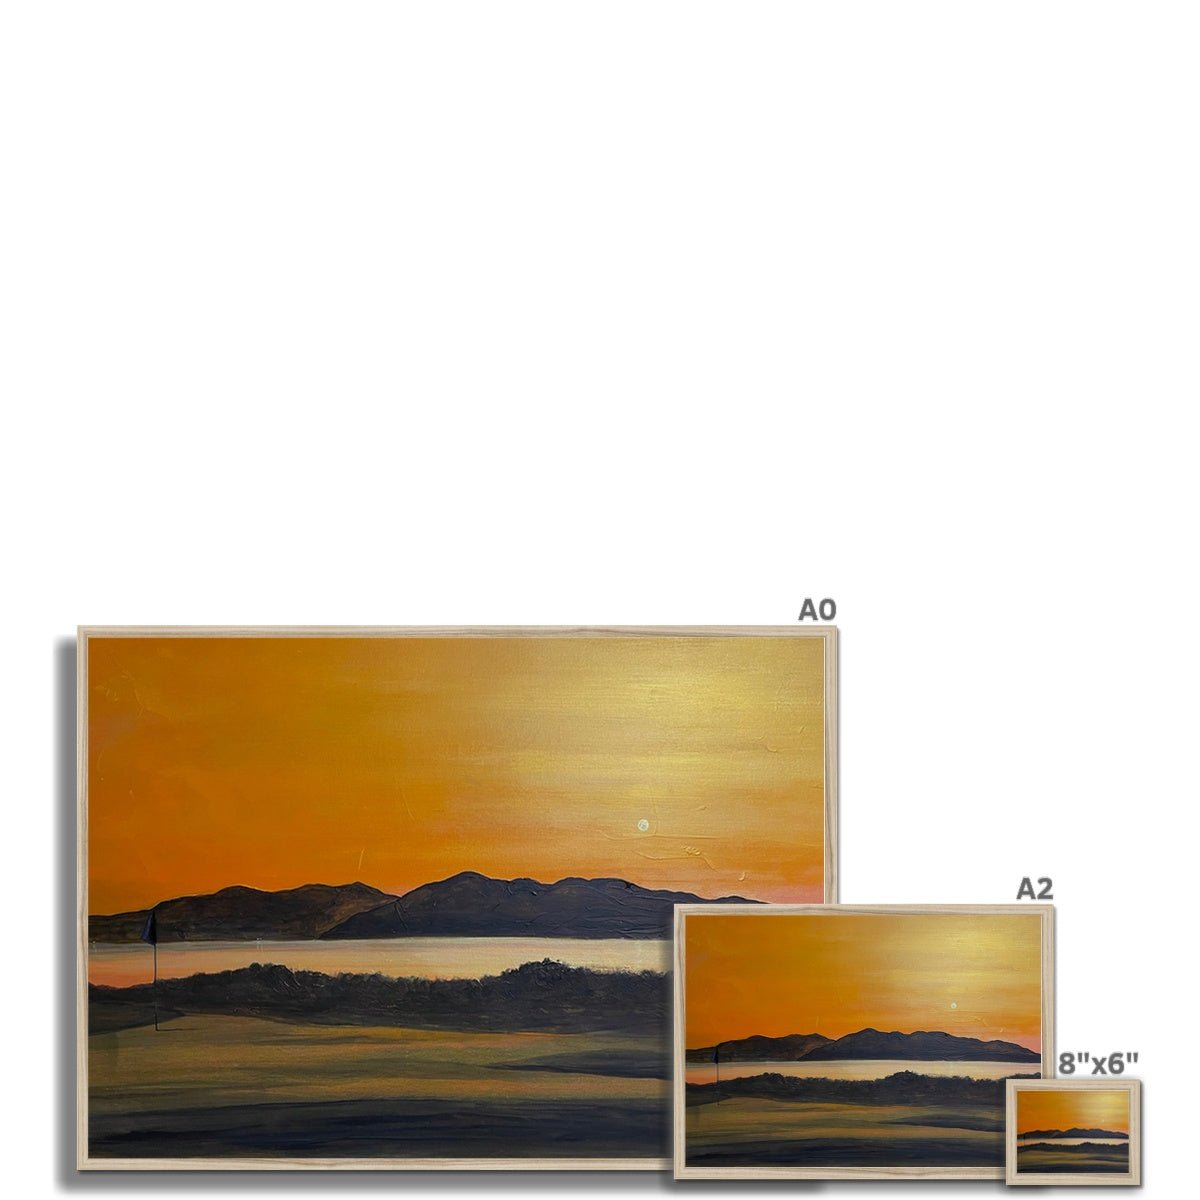 Arran & The 5th Green Royal Troon Golf Course Painting | Framed Prints From Scotland-Framed Prints-Arran Art Gallery-Paintings, Prints, Homeware, Art Gifts From Scotland By Scottish Artist Kevin Hunter